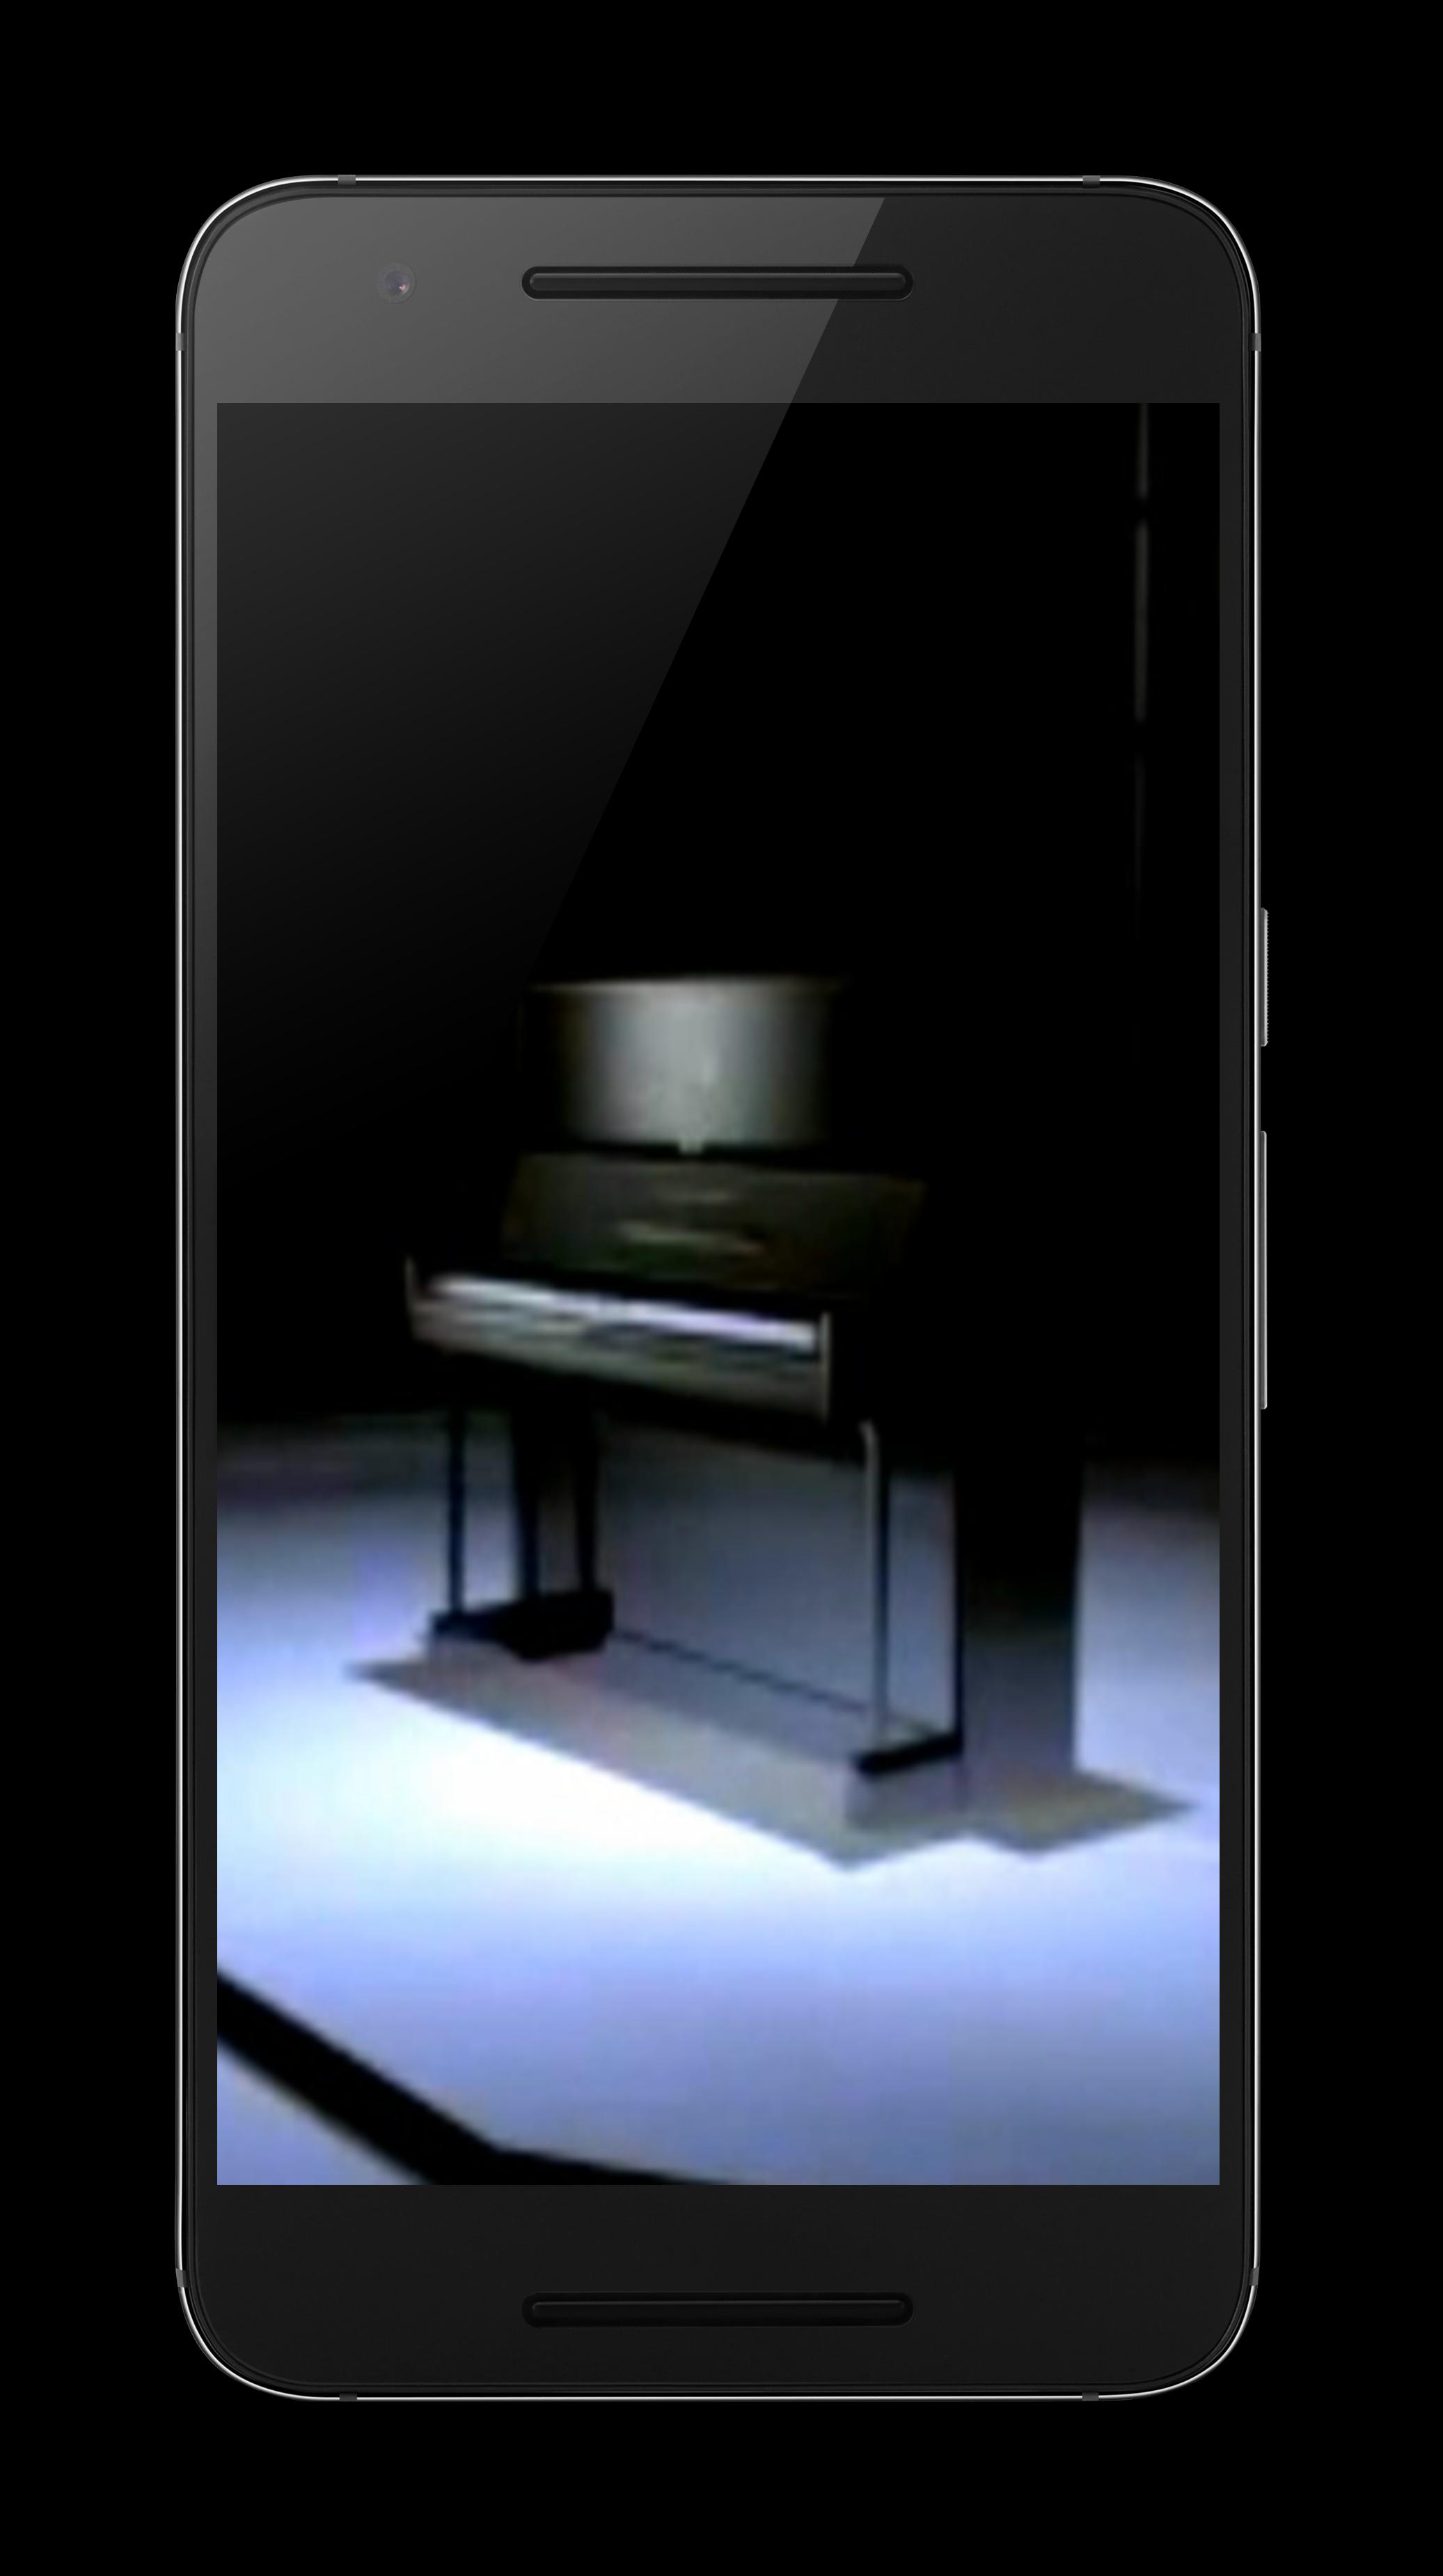 piano wallpaper for android,product,technology,electronics,gadget,electronic device